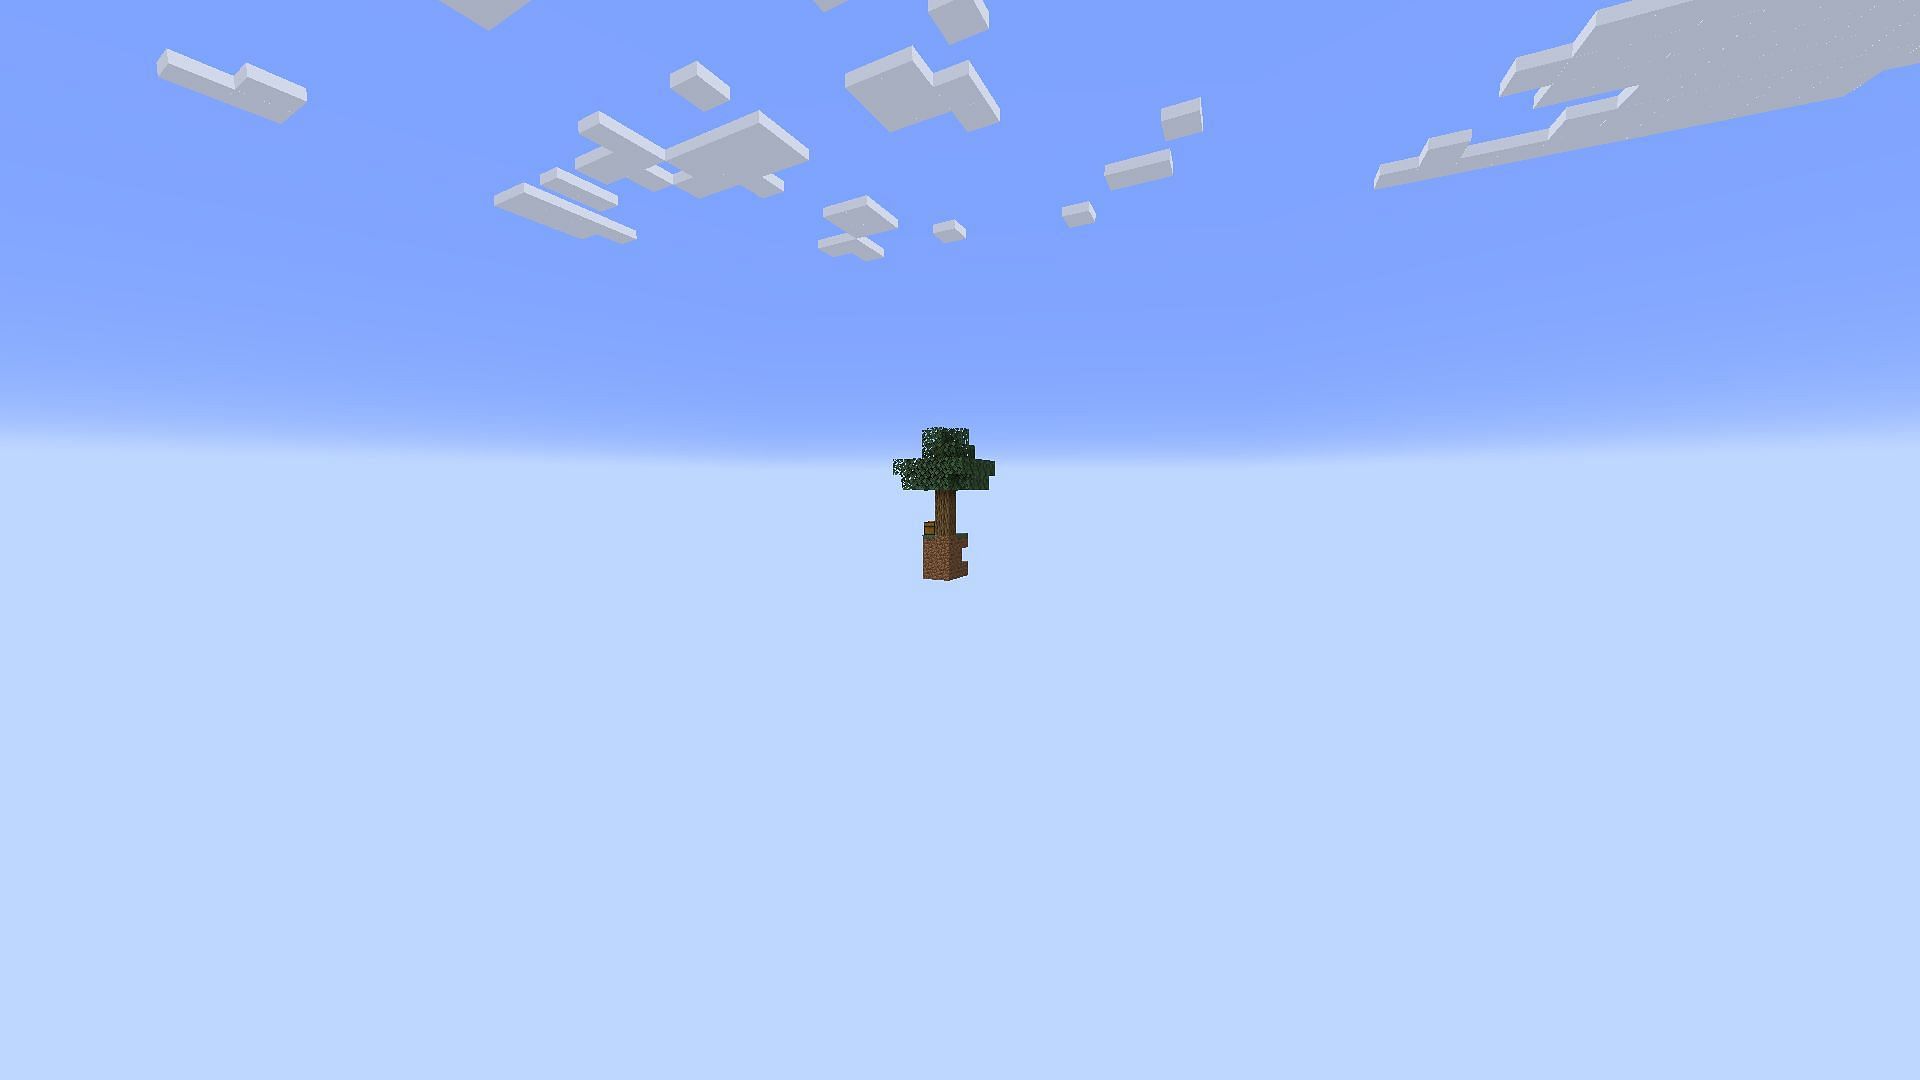 Players will soon understand that this game mode is not meant for exploration (Image via Mojang)